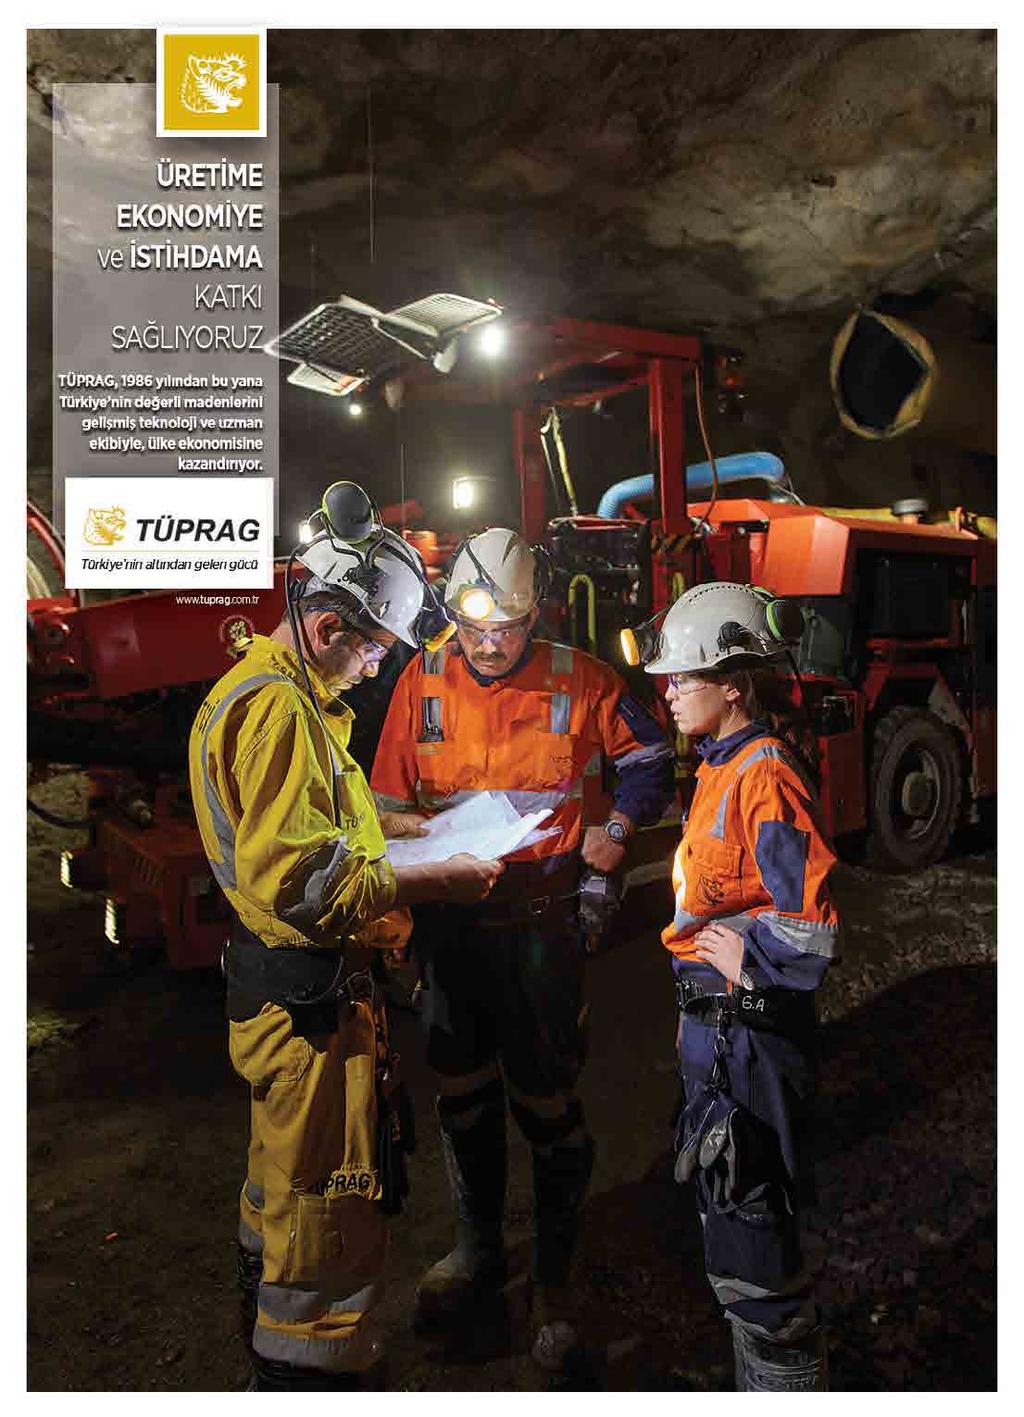 This paper describes the practical aspects of longwall geomechanics, management of health and safety, longwall mine design and planning for highly productive coal mines in Australia.